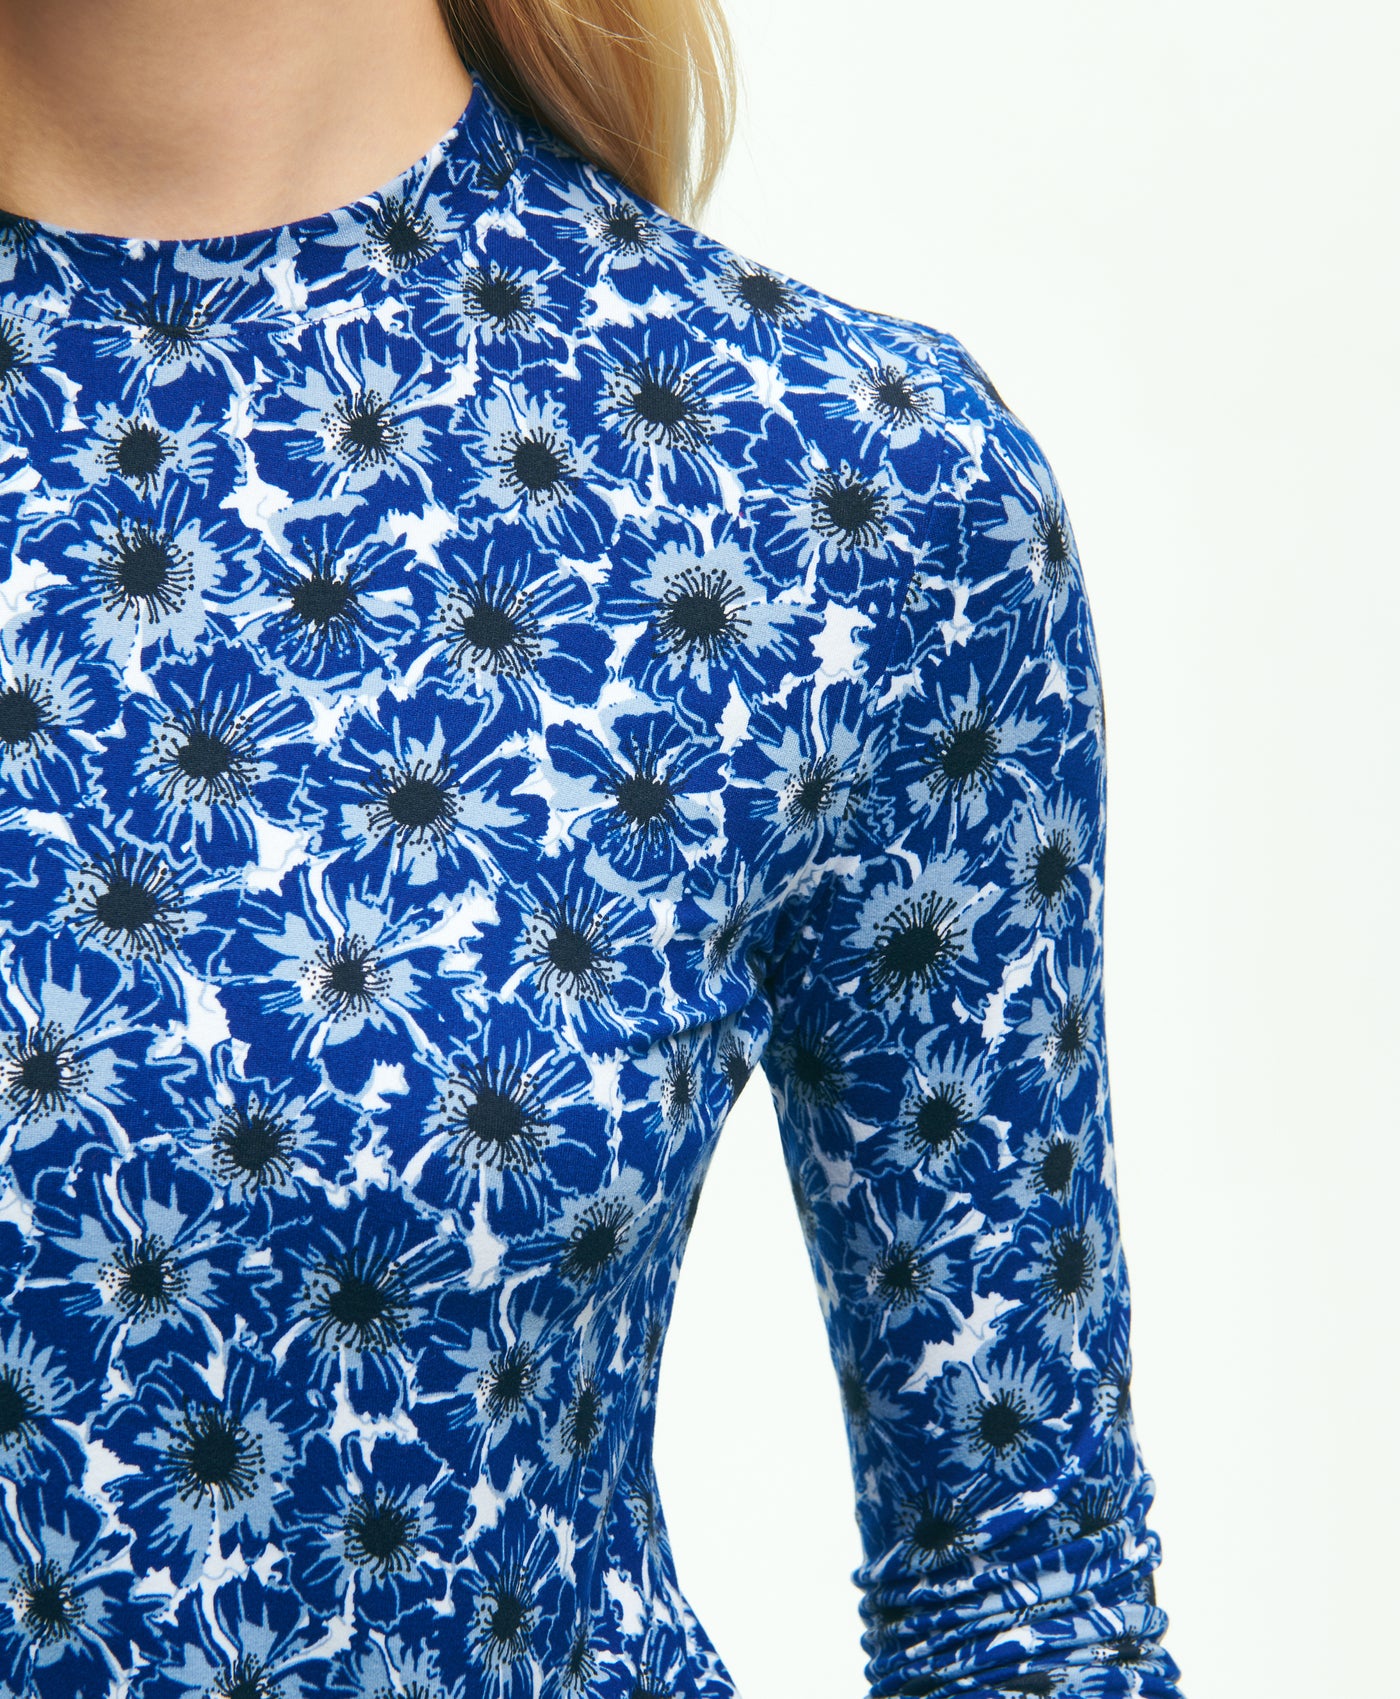 Poppy Print Long-Sleeve Top - Brooks Brothers Canada